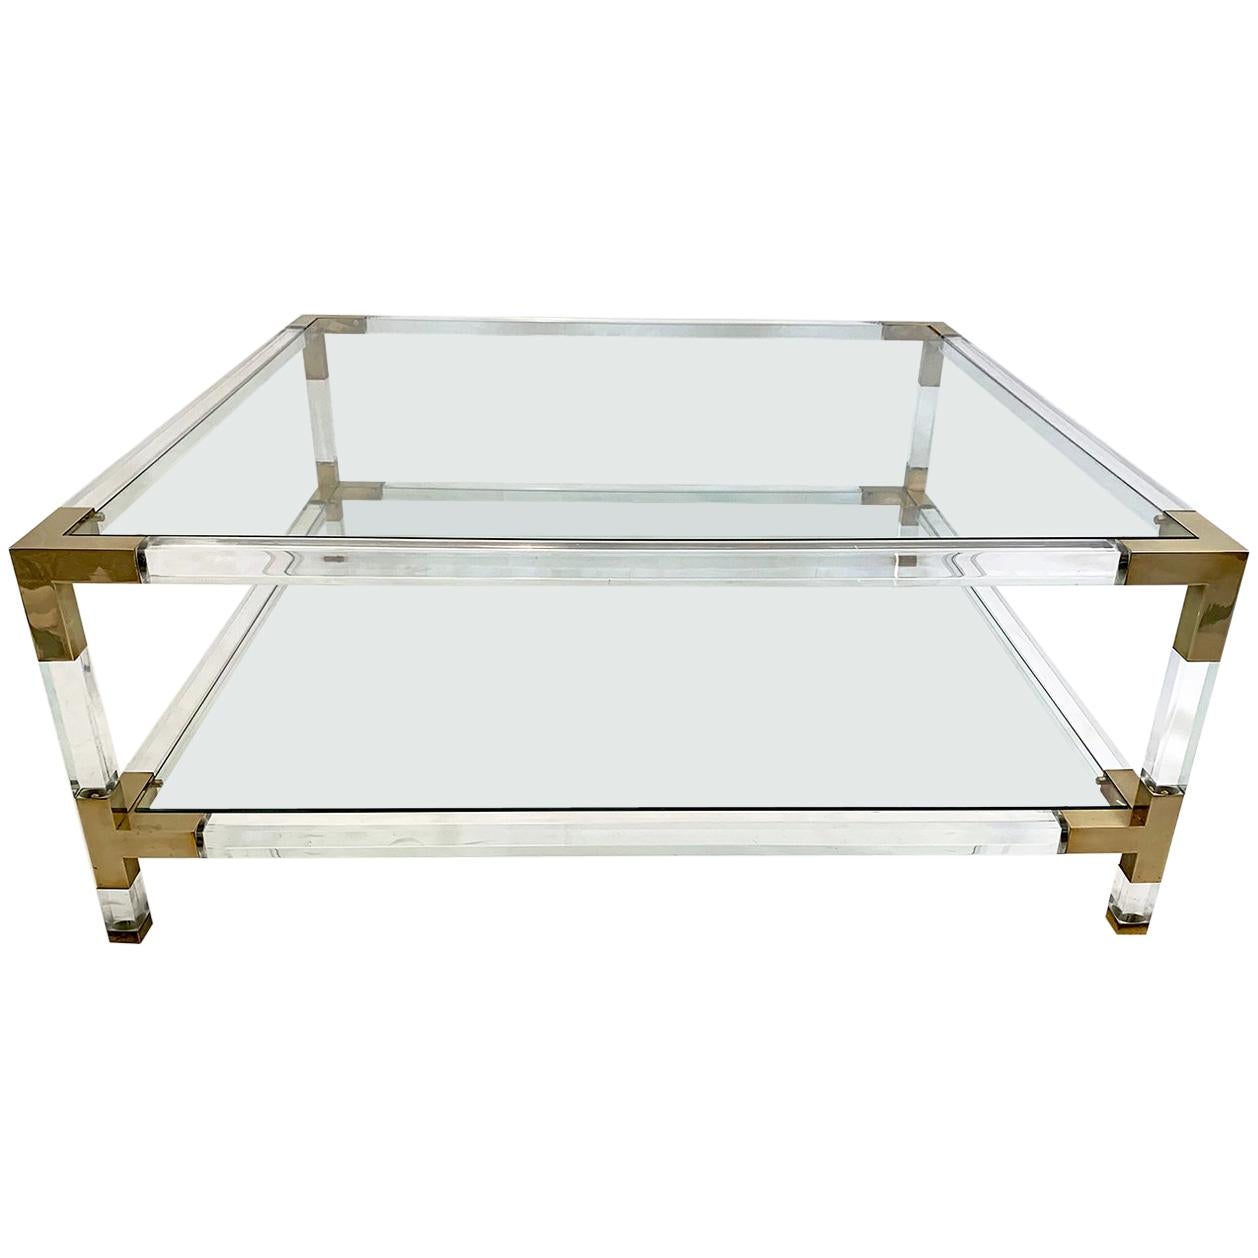 Large Square Coffee Table, Lucite and Brass, 1970 For Sale